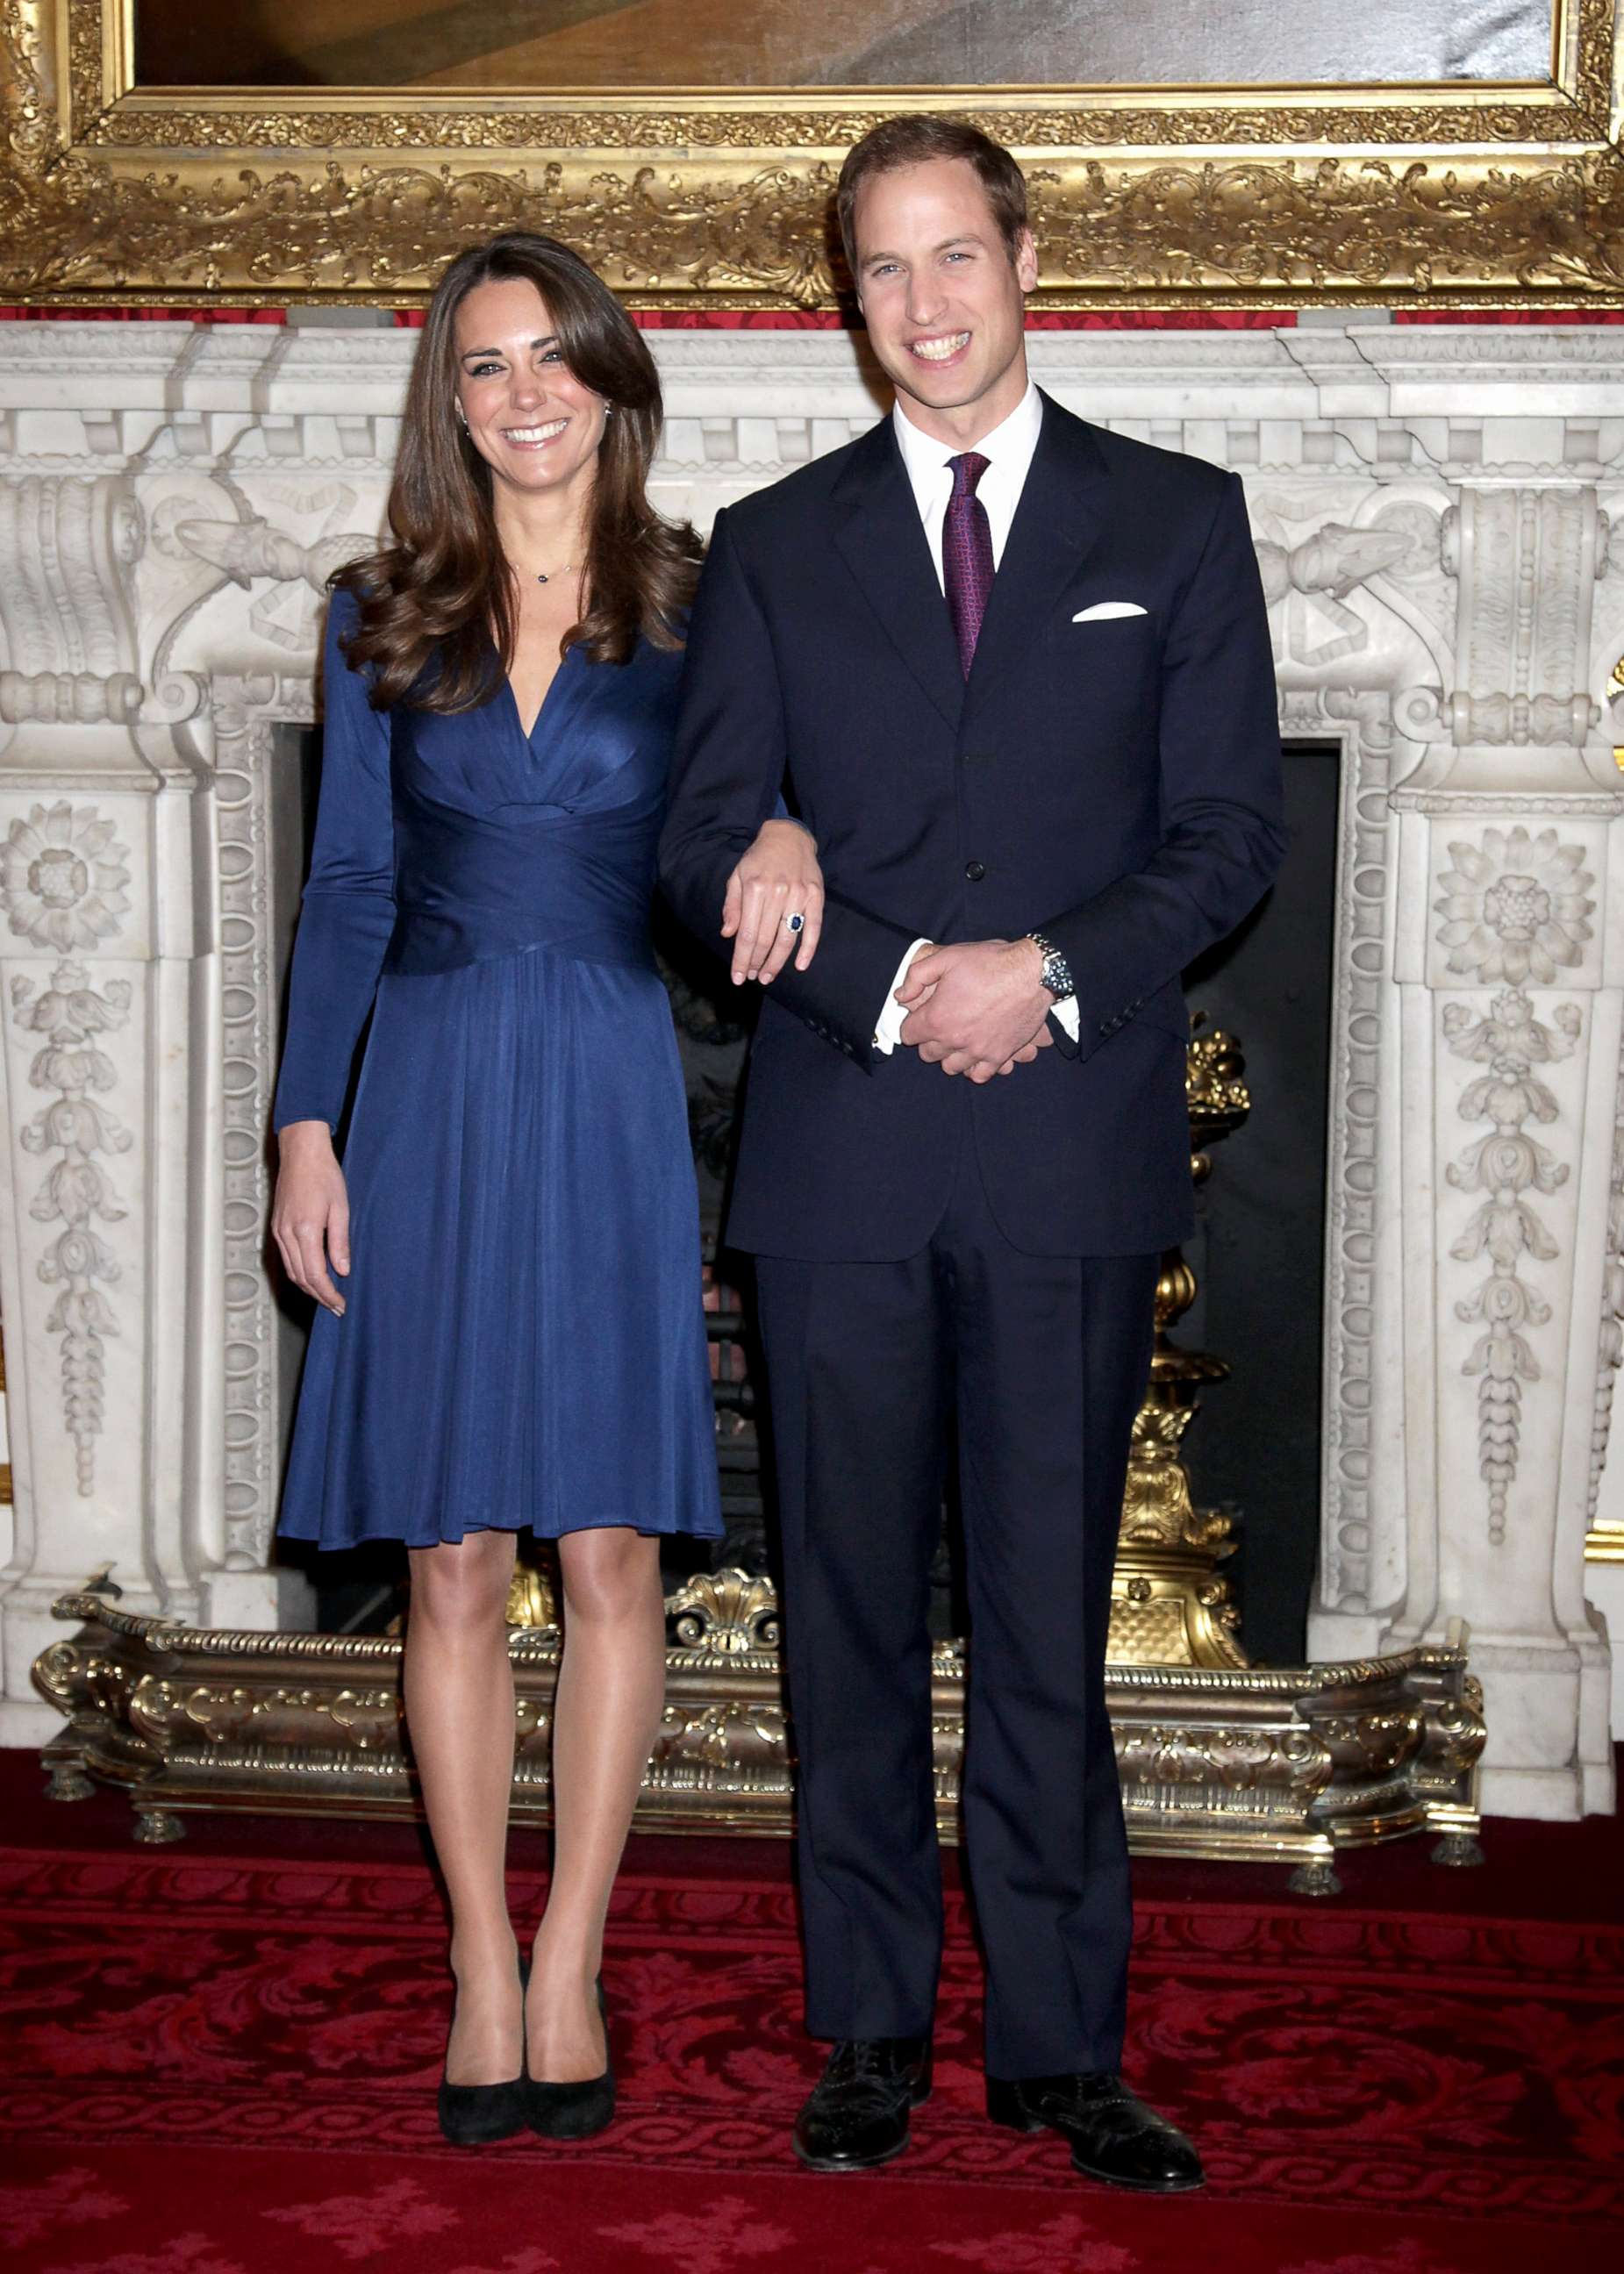 PHOTO: Prince William and Kate Middleton pose for photographs in the State Apartments of St James Palace, Nov. 16, 2010, in London.